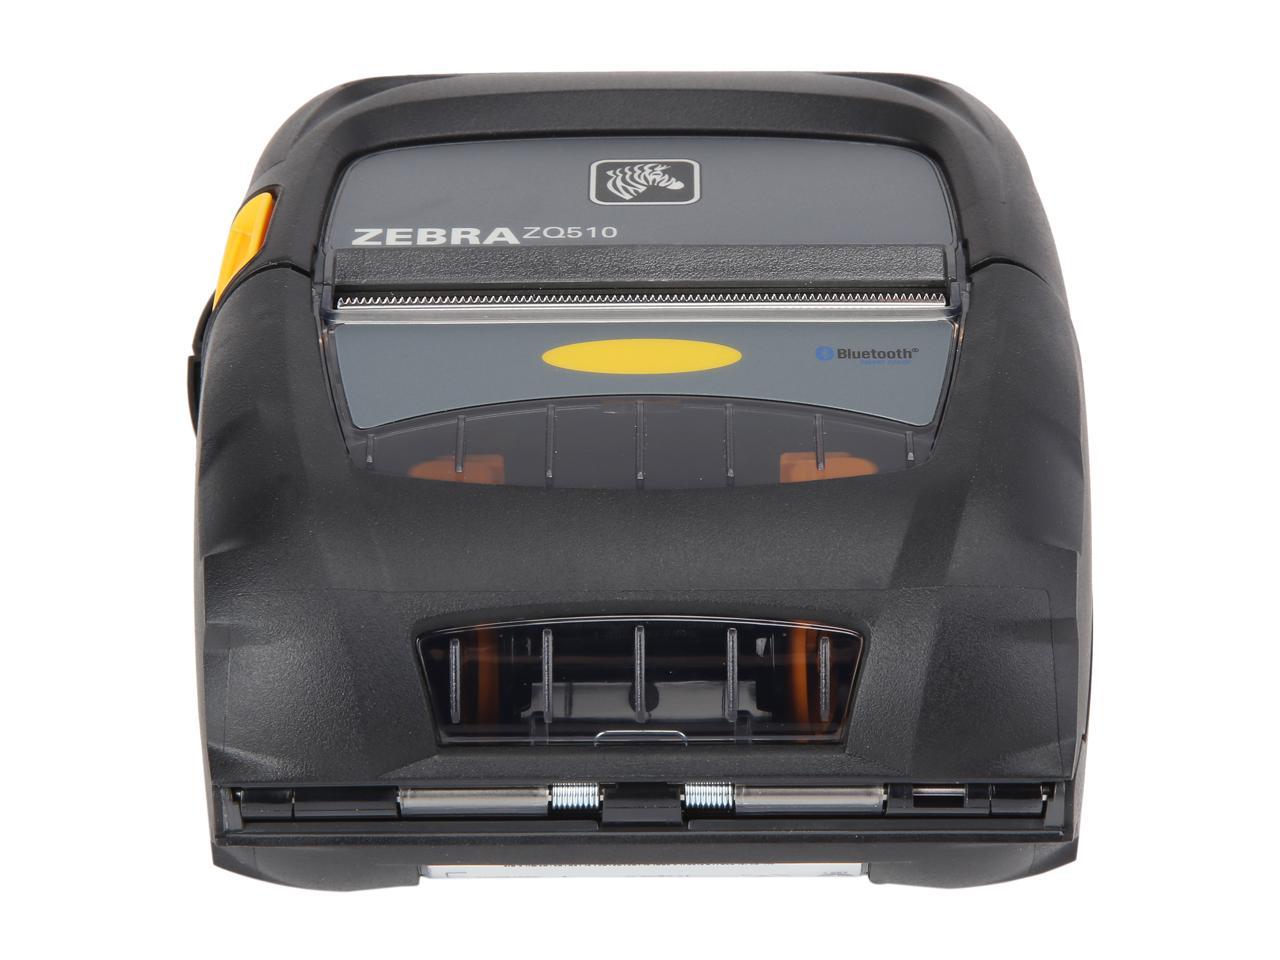 Zebra Zq510 3 Mobile Direct Thermal Receipt And Label Printer 203 Dpi Bluetooth 40 Linered 9512